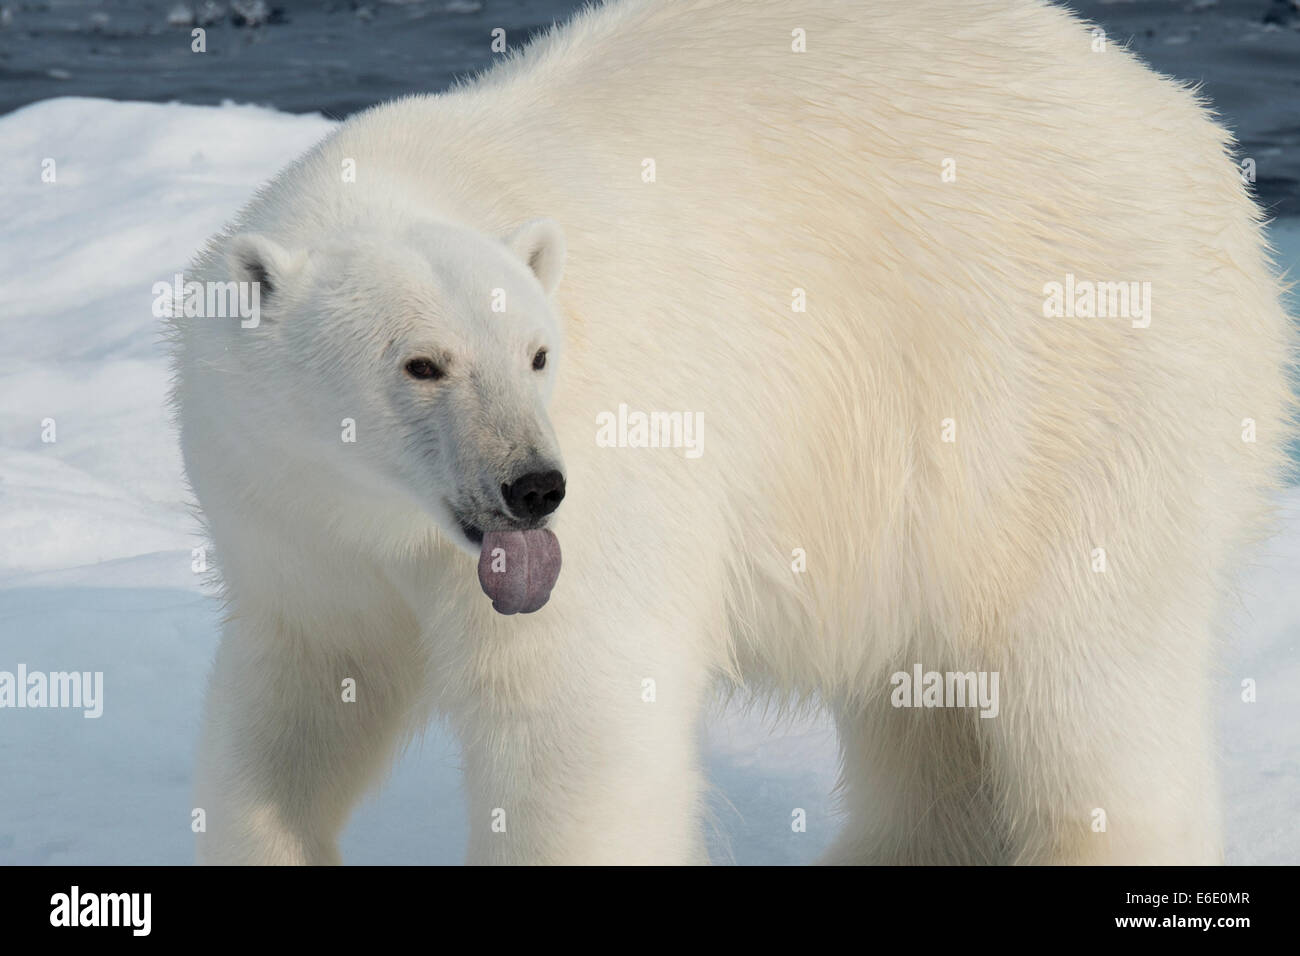 Male Polar Bear, Ursus maritimus, with tongue sticking out, on an iceberg, Baffin Island, Canadian Arctic. Stock Photo